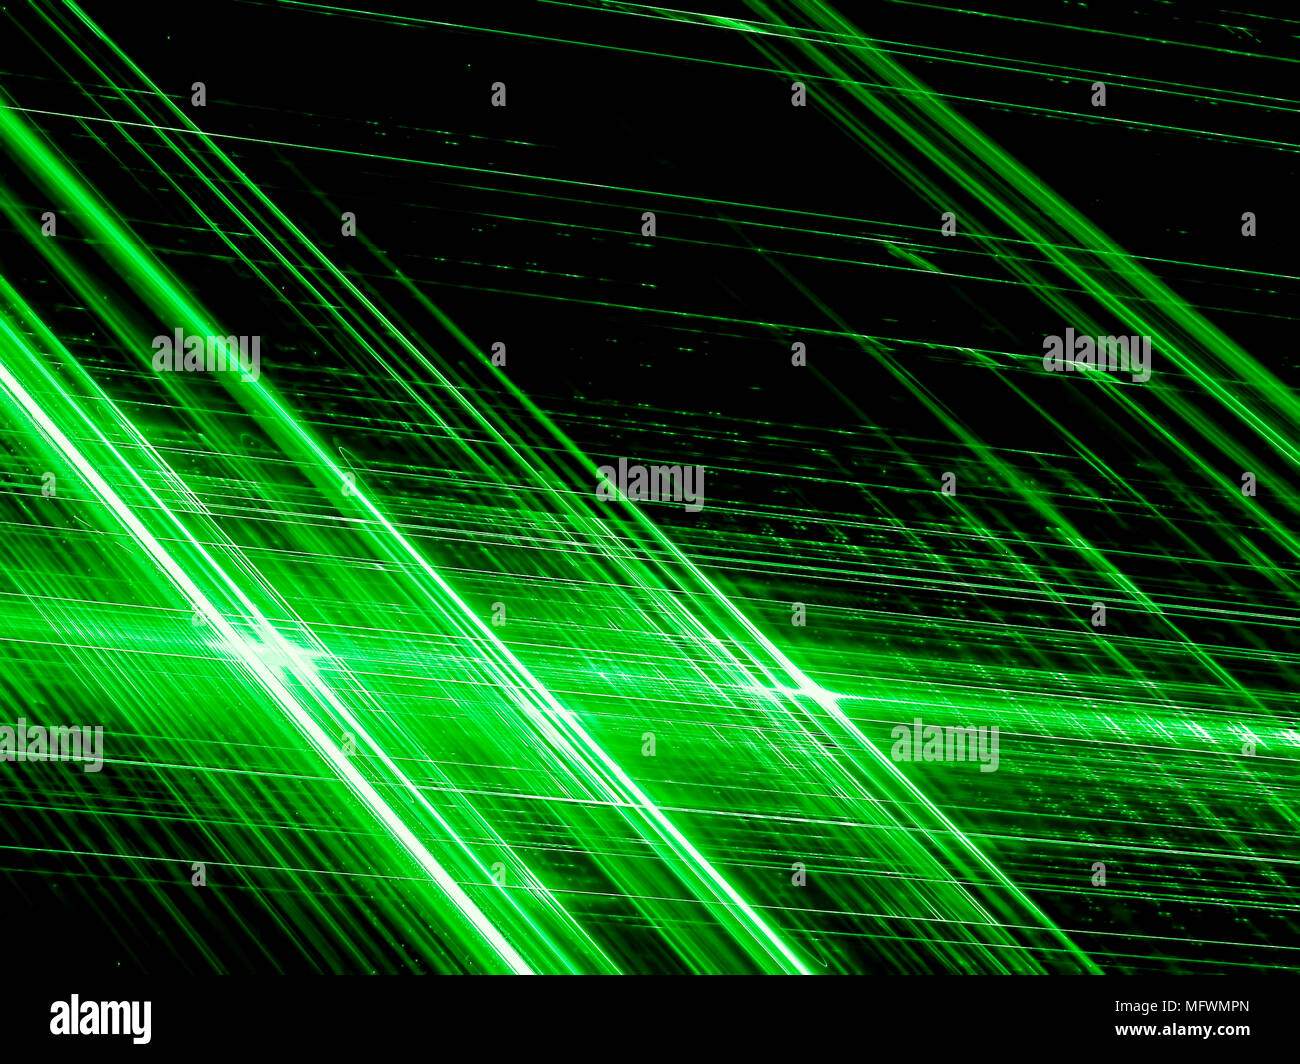 Diagonal glowing stripes - abstract digitally generated image Stock Photo